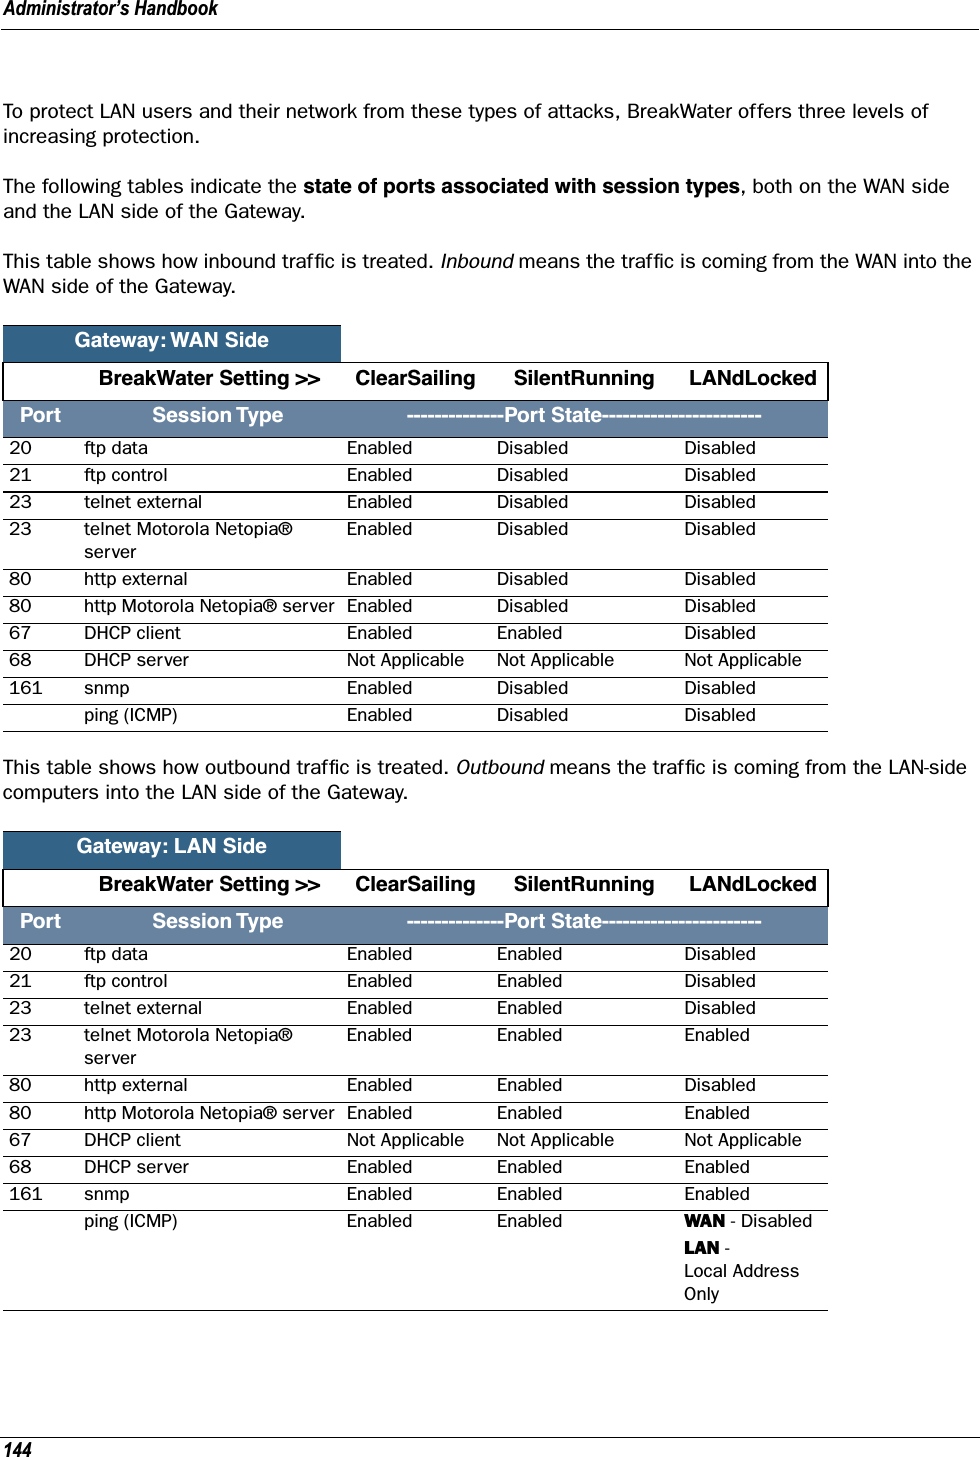 Administrator’s Handbook144To protect LAN users and their network from these types of attacks, BreakWater offers three levels of increasing protection. The following tables indicate the state of ports associated with session types, both on the WAN side and the LAN side of the Gateway.This table shows how inbound trafﬁc is treated. Inbound means the trafﬁc is coming from the WAN into the WAN side of the Gateway. This table shows how outbound trafﬁc is treated. Outbound means the trafﬁc is coming from the LAN-side computers into the LAN side of the Gateway. Gateway: WAN SideBreakWater Setting &gt;&gt; ClearSailing SilentRunning LANdLockedPort    Session Type --------------Port State-----------------------20 ftp data Enabled Disabled Disabled21 ftp control Enabled Disabled Disabled23 telnet external Enabled Disabled Disabled23 telnet Motorola Netopia® serverEnabled Disabled Disabled80 http external Enabled Disabled Disabled80 http Motorola Netopia® server Enabled Disabled Disabled67 DHCP client Enabled Enabled Disabled68 DHCP server Not Applicable Not Applicable Not Applicable161 snmp Enabled Disabled Disabledping (ICMP) Enabled Disabled DisabledGateway: LAN SideBreakWater Setting &gt;&gt; ClearSailing SilentRunning LANdLockedPort    Session Type --------------Port State-----------------------20 ftp data Enabled Enabled Disabled21 ftp control Enabled Enabled Disabled23 telnet external Enabled Enabled Disabled23 telnet Motorola Netopia® serverEnabled Enabled Enabled80 http external Enabled Enabled Disabled80 http Motorola Netopia® server Enabled Enabled Enabled67 DHCP client Not Applicable Not Applicable Not Applicable68 DHCP server Enabled Enabled Enabled161 snmp Enabled Enabled Enabledping (ICMP) Enabled Enabled WAN - DisabledLAN -Local Address Only